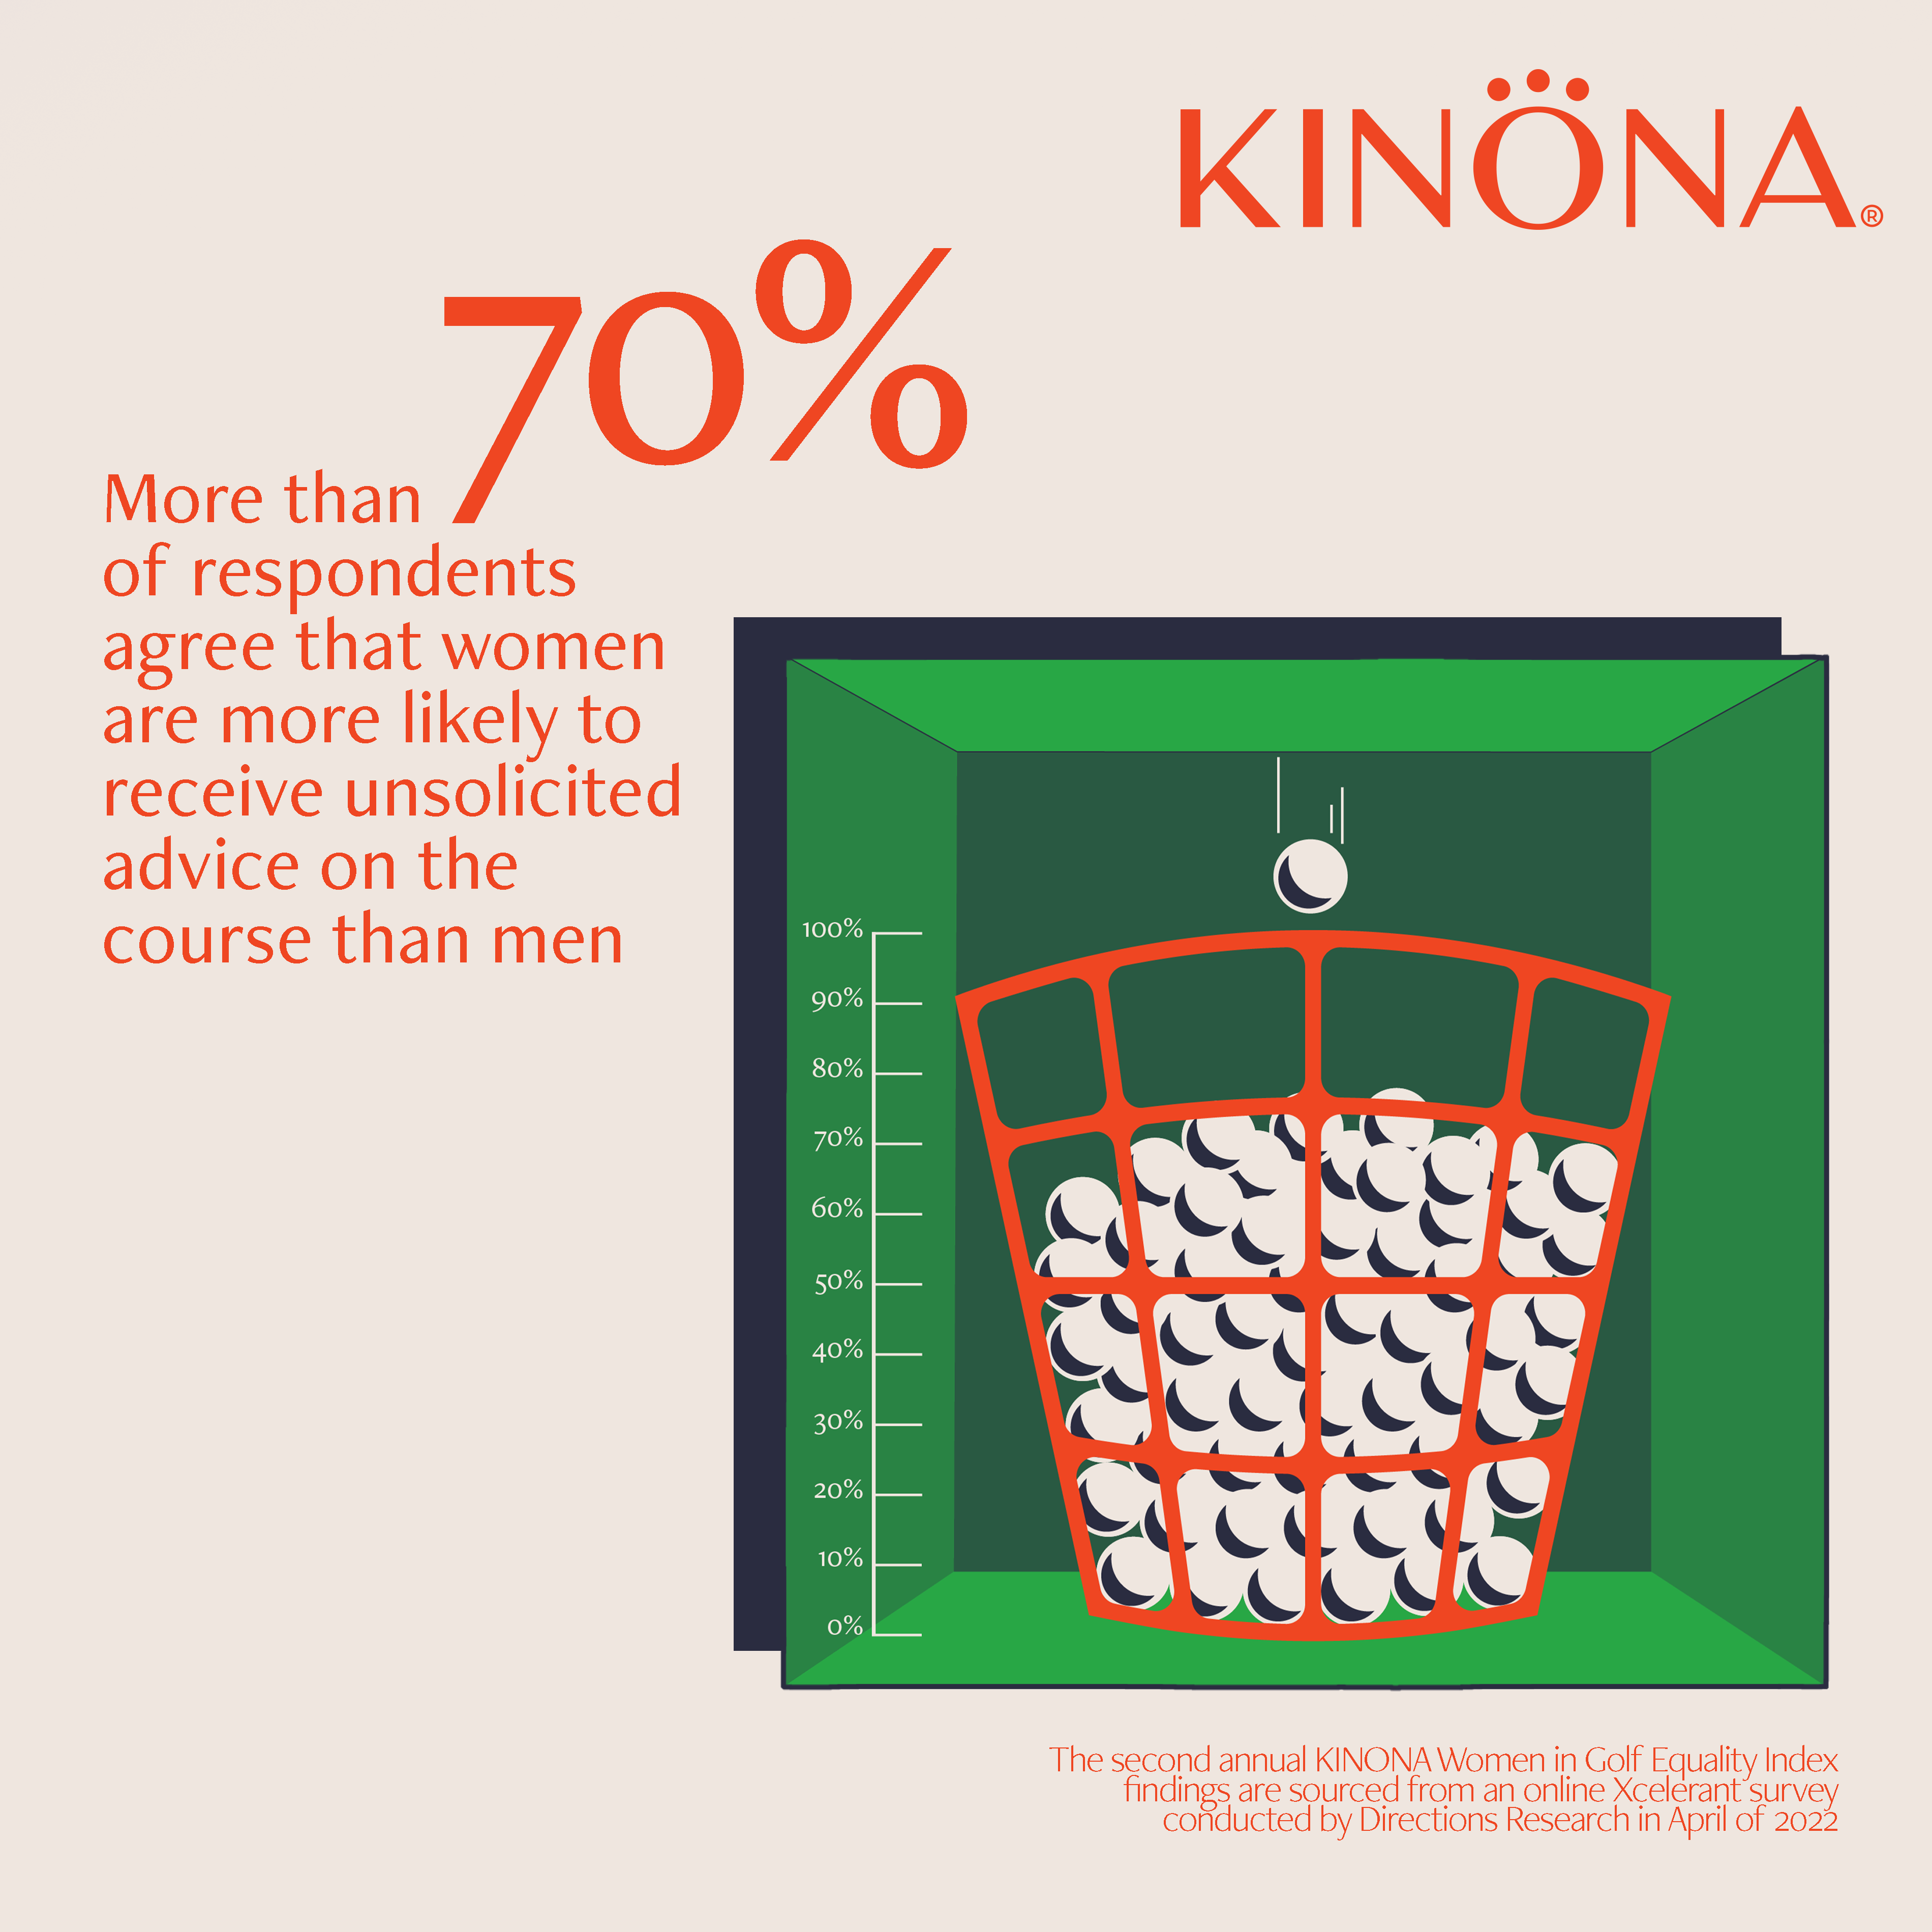 KINONA Second Annual Women in Golf Equality Index Reveals that Women Receive Unsolicited Advice